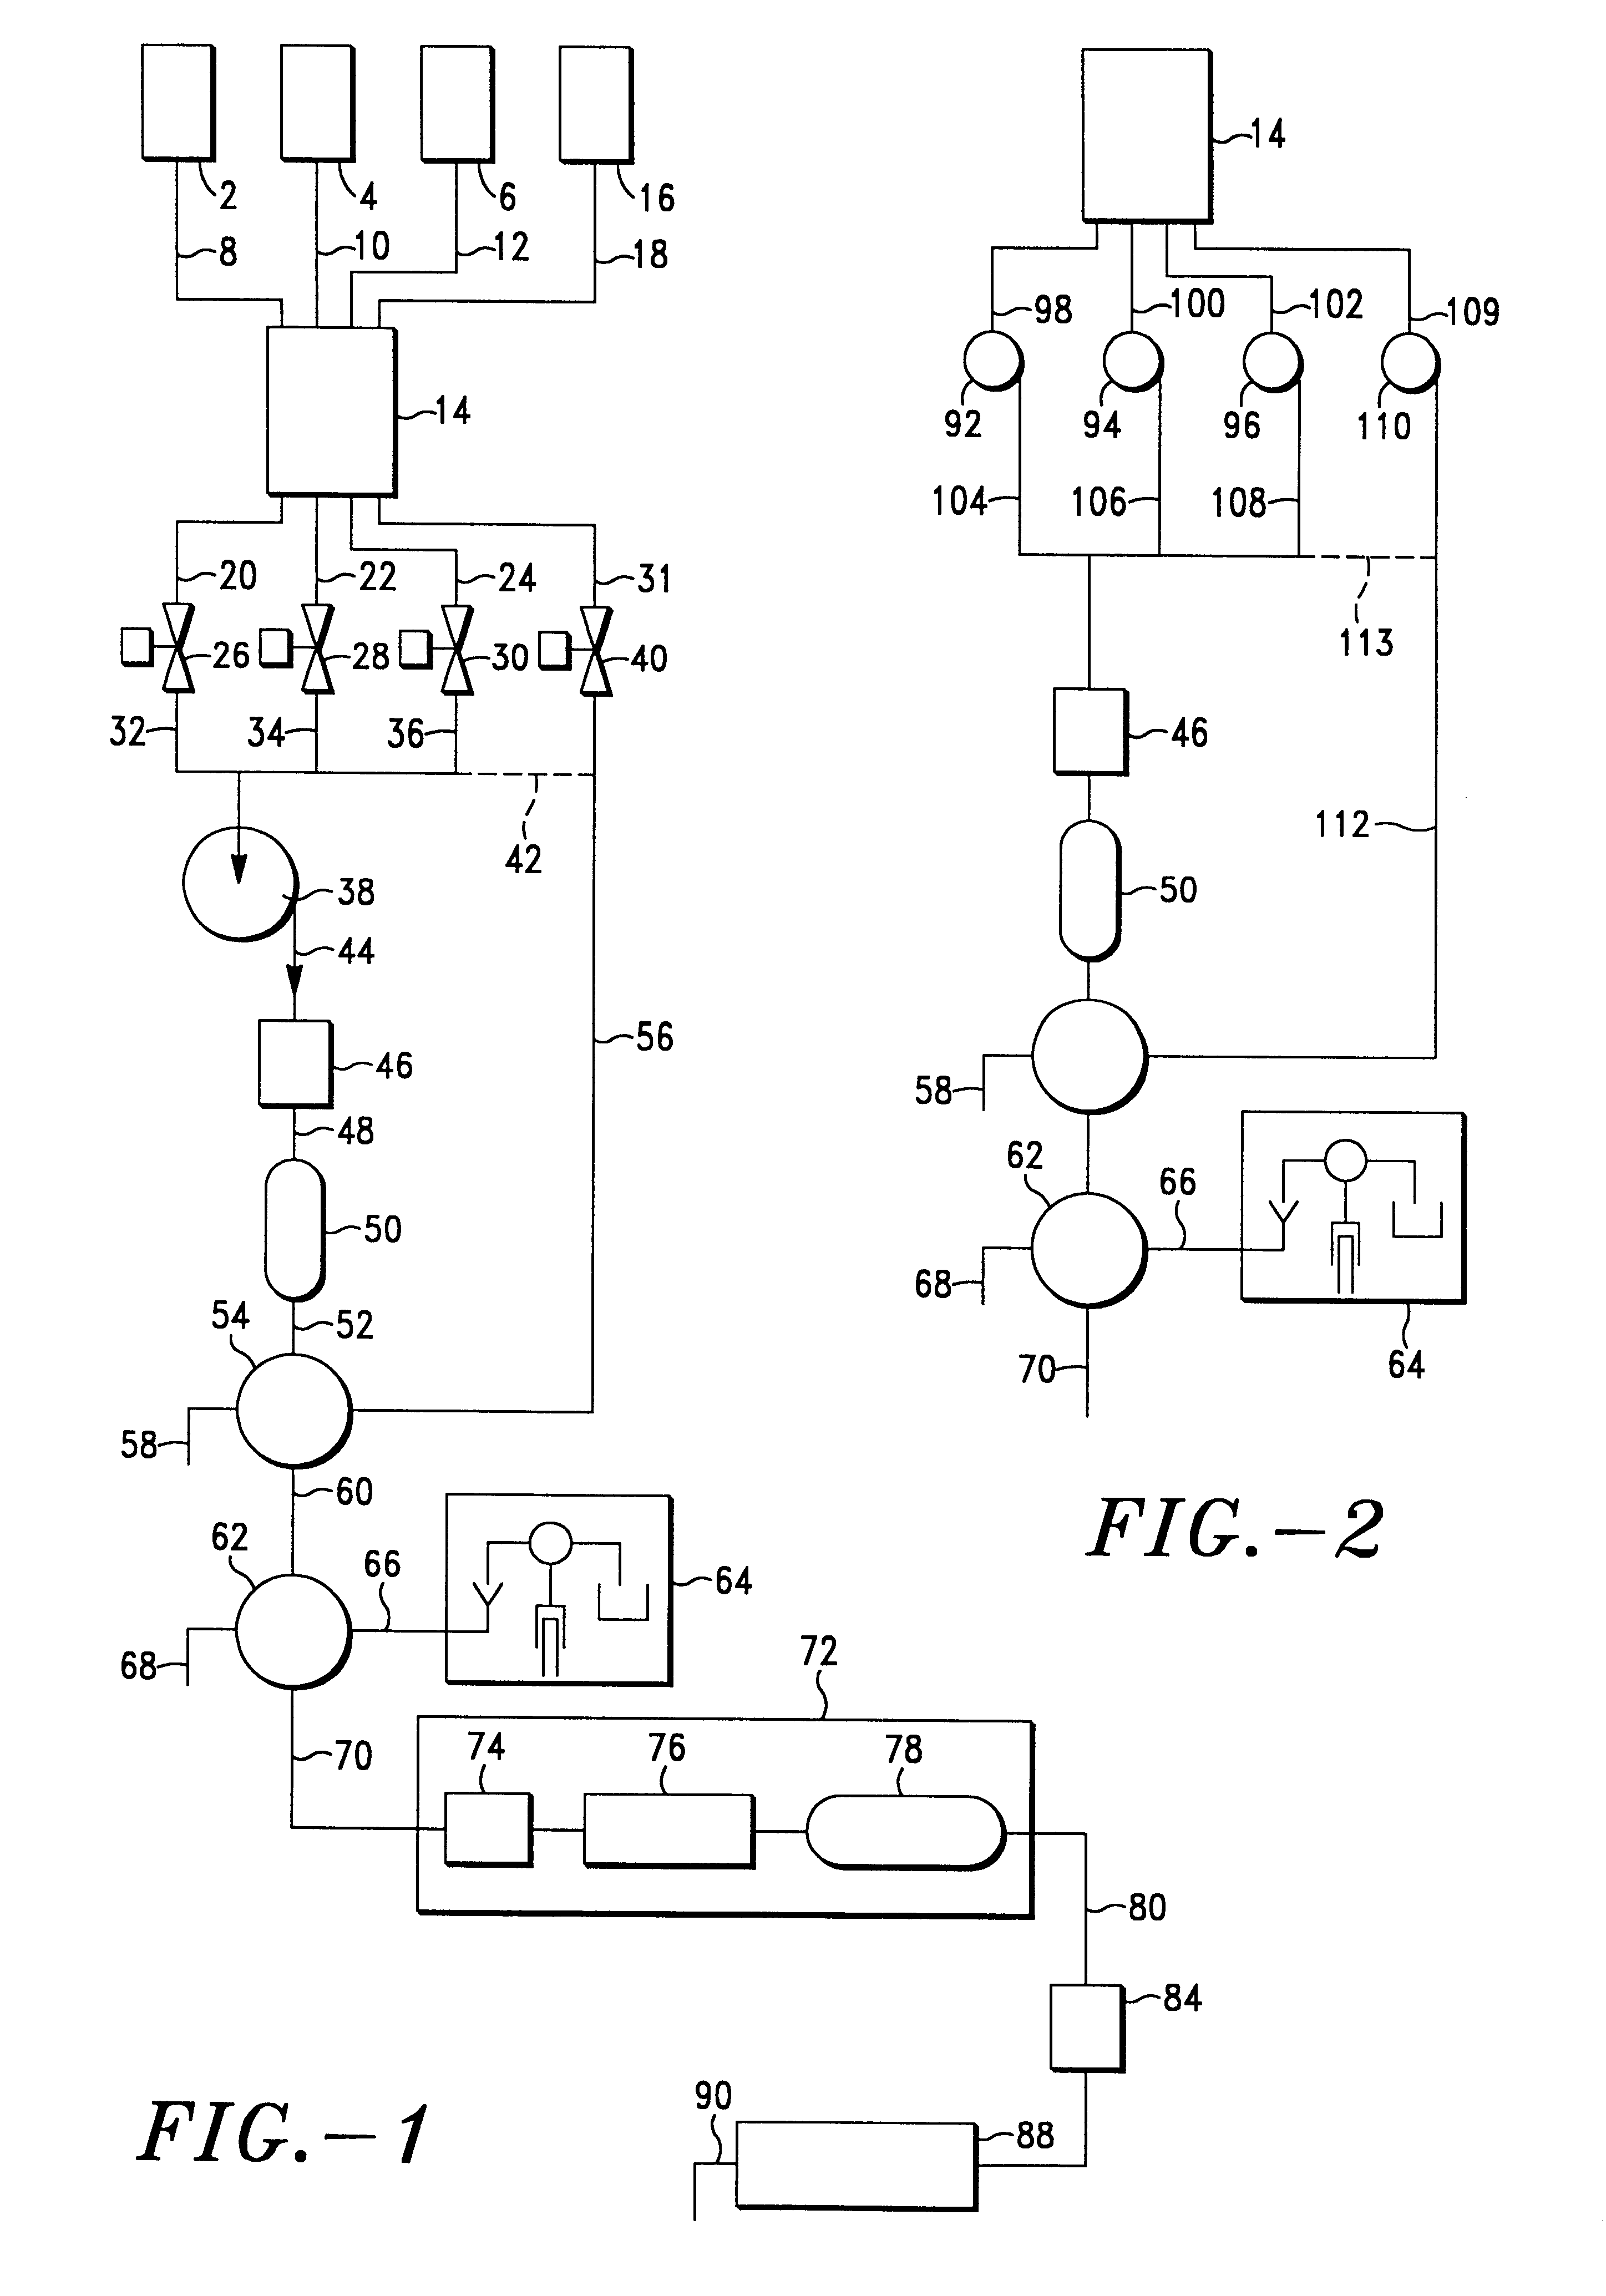 Apparatus and method for separating and purifying polynucleotides